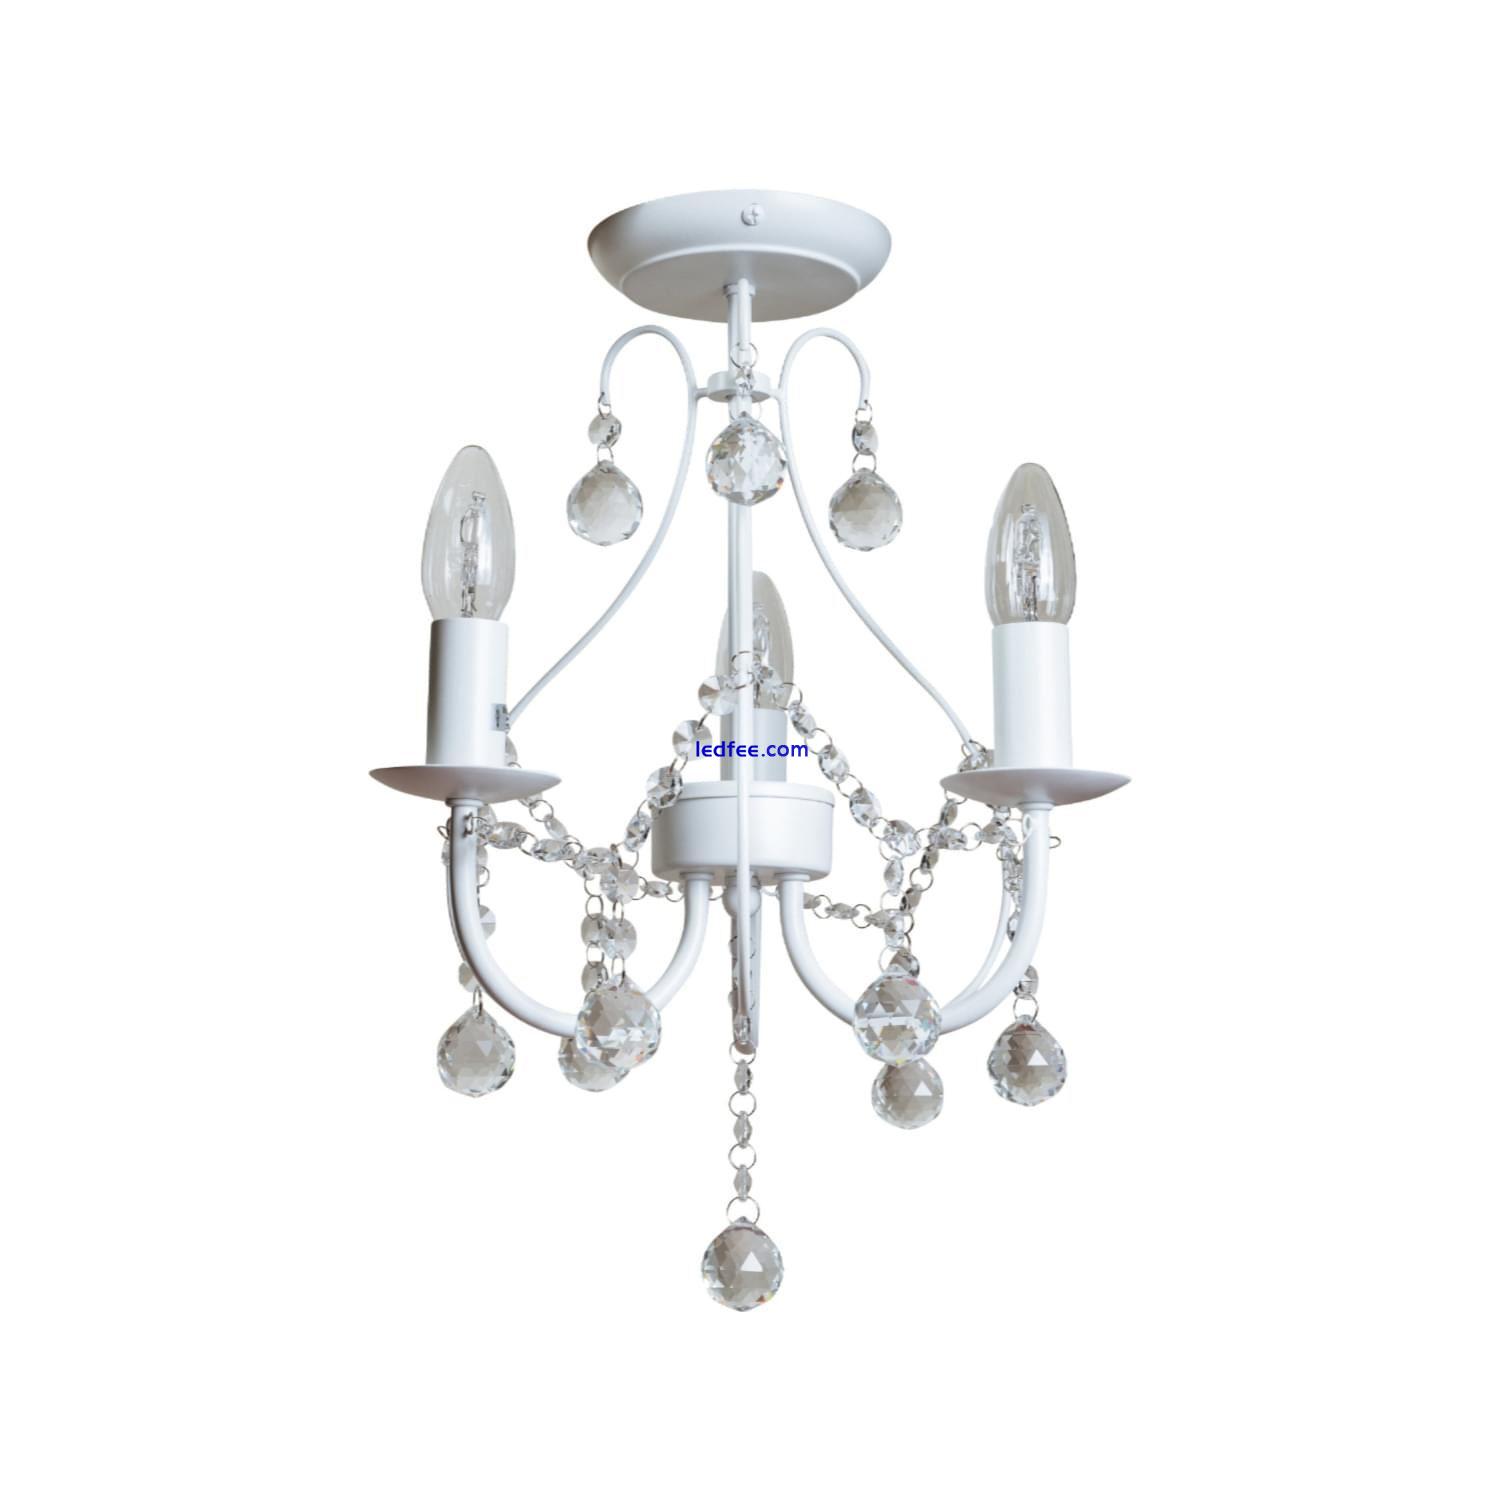 Luxury White & Crystal 3 Light Ceiling Fitting Chandelier Light Lounge Sapparia 0 